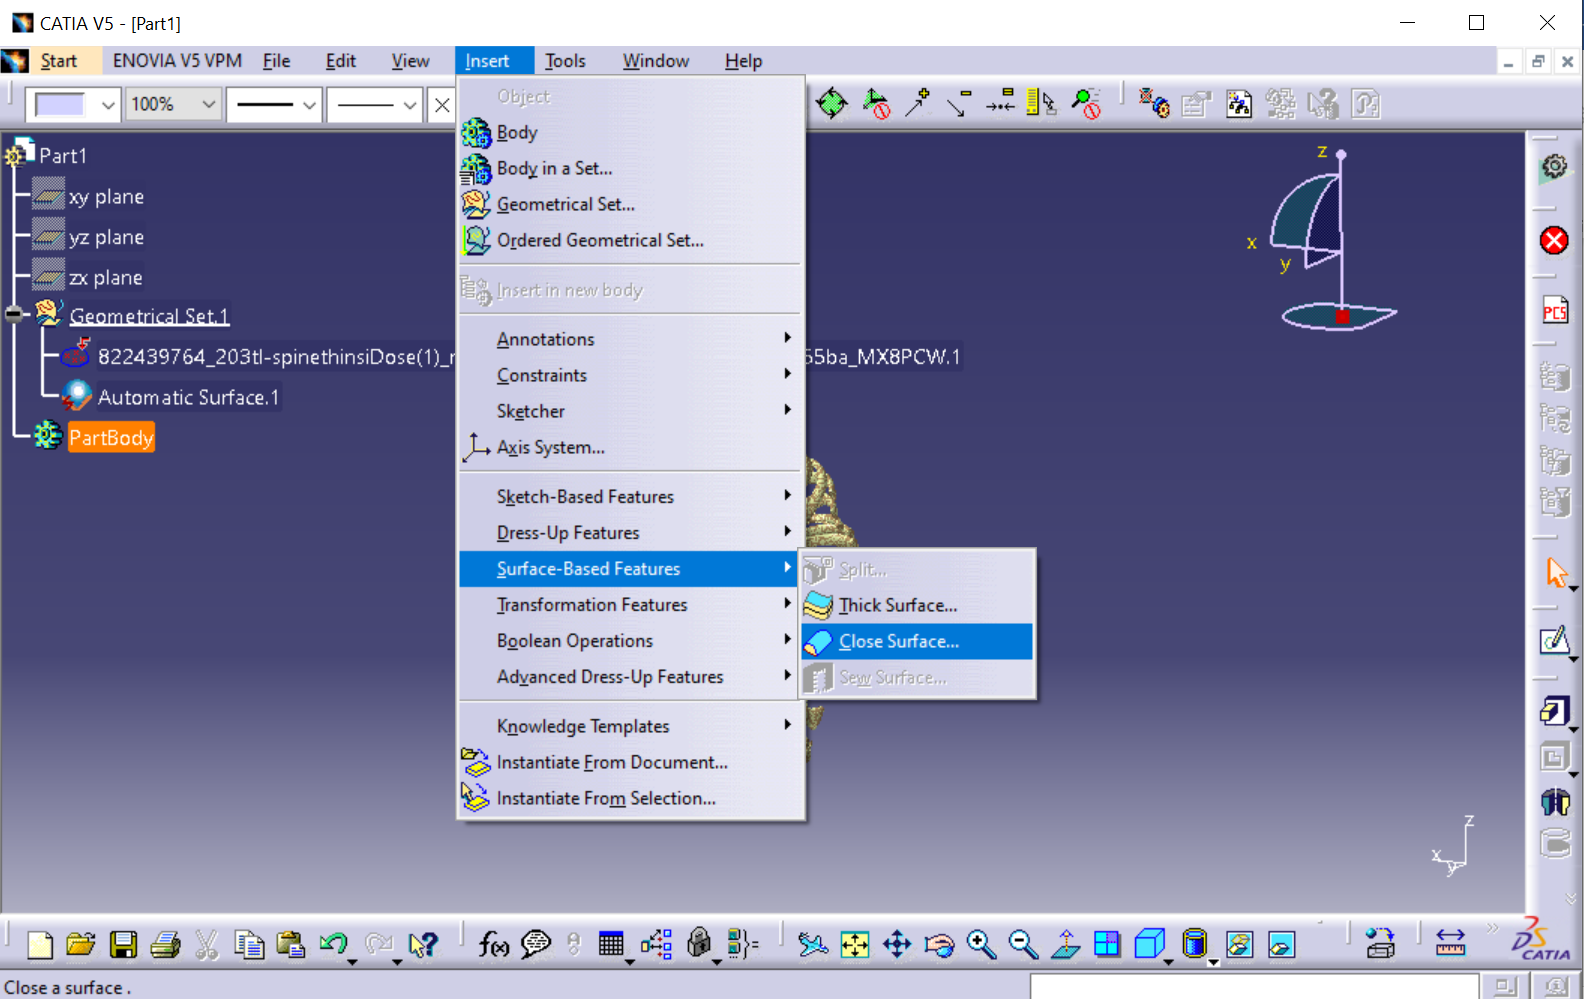 Closing the surface after reconstruction in CATIA V5